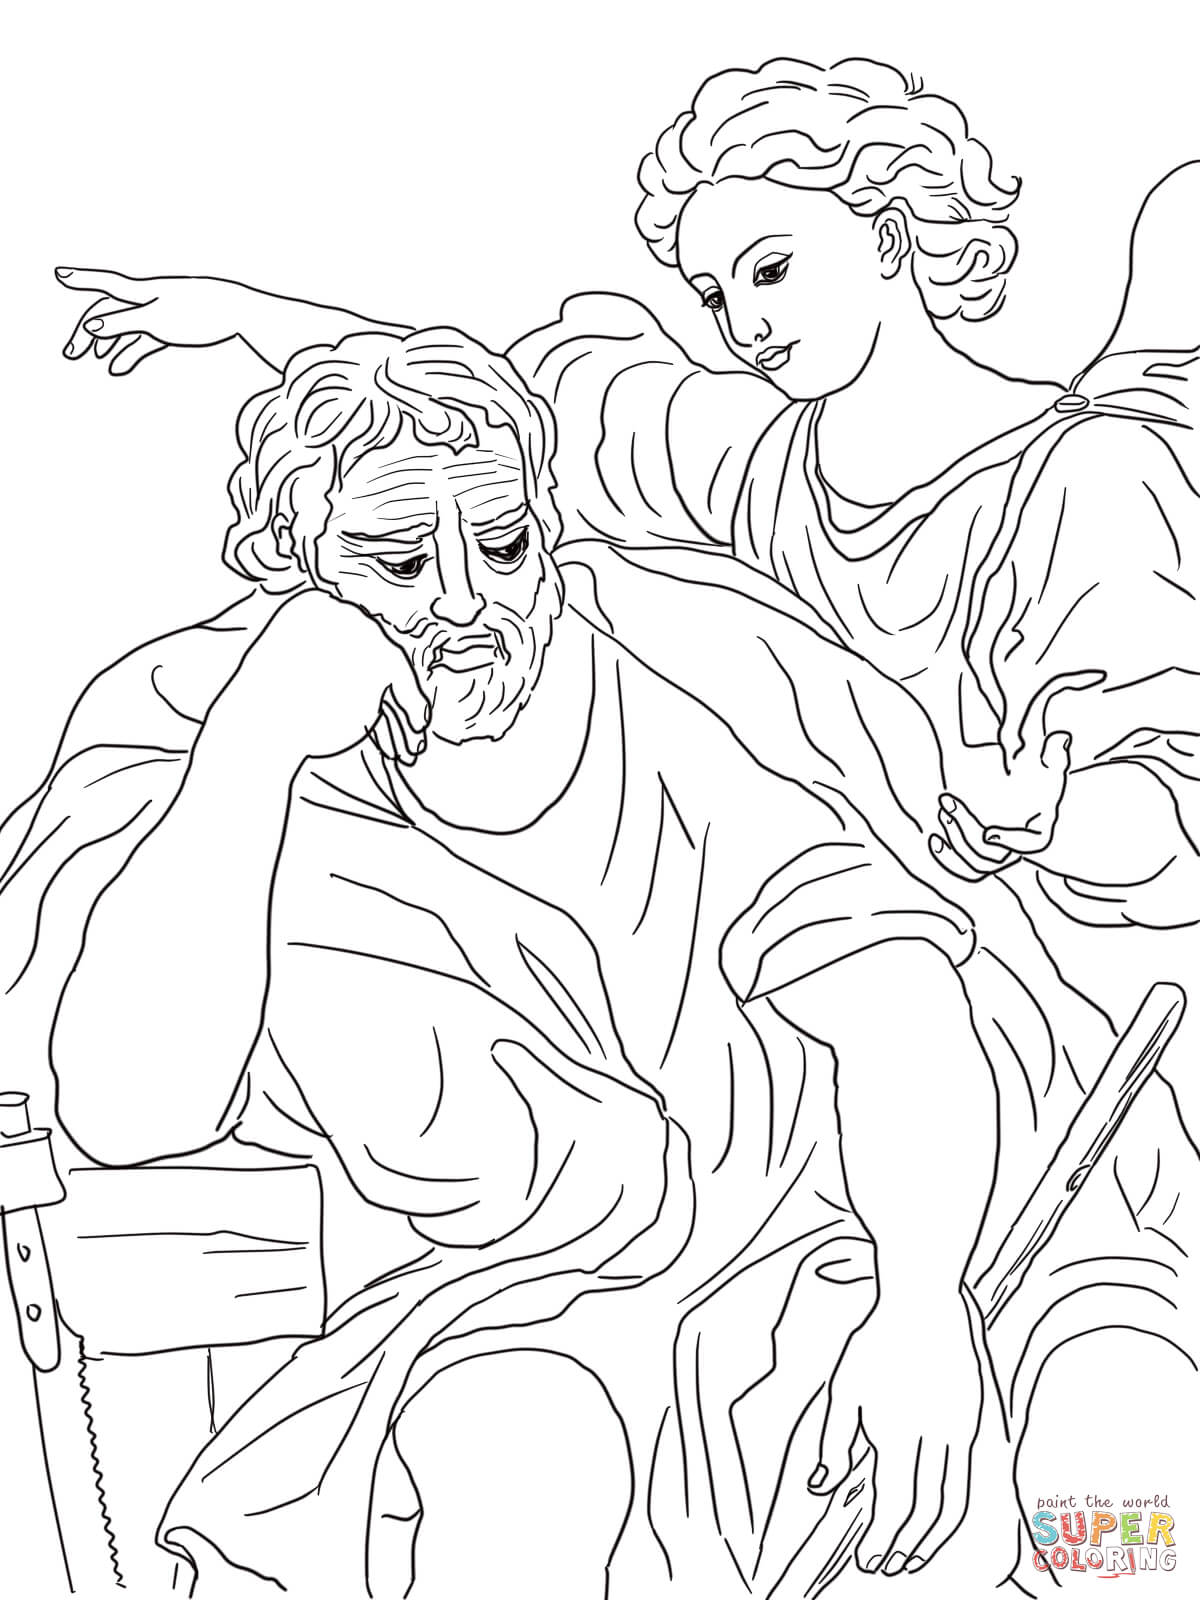 The Dream of Saint Joseph coloring page | Free Printable Coloring ...